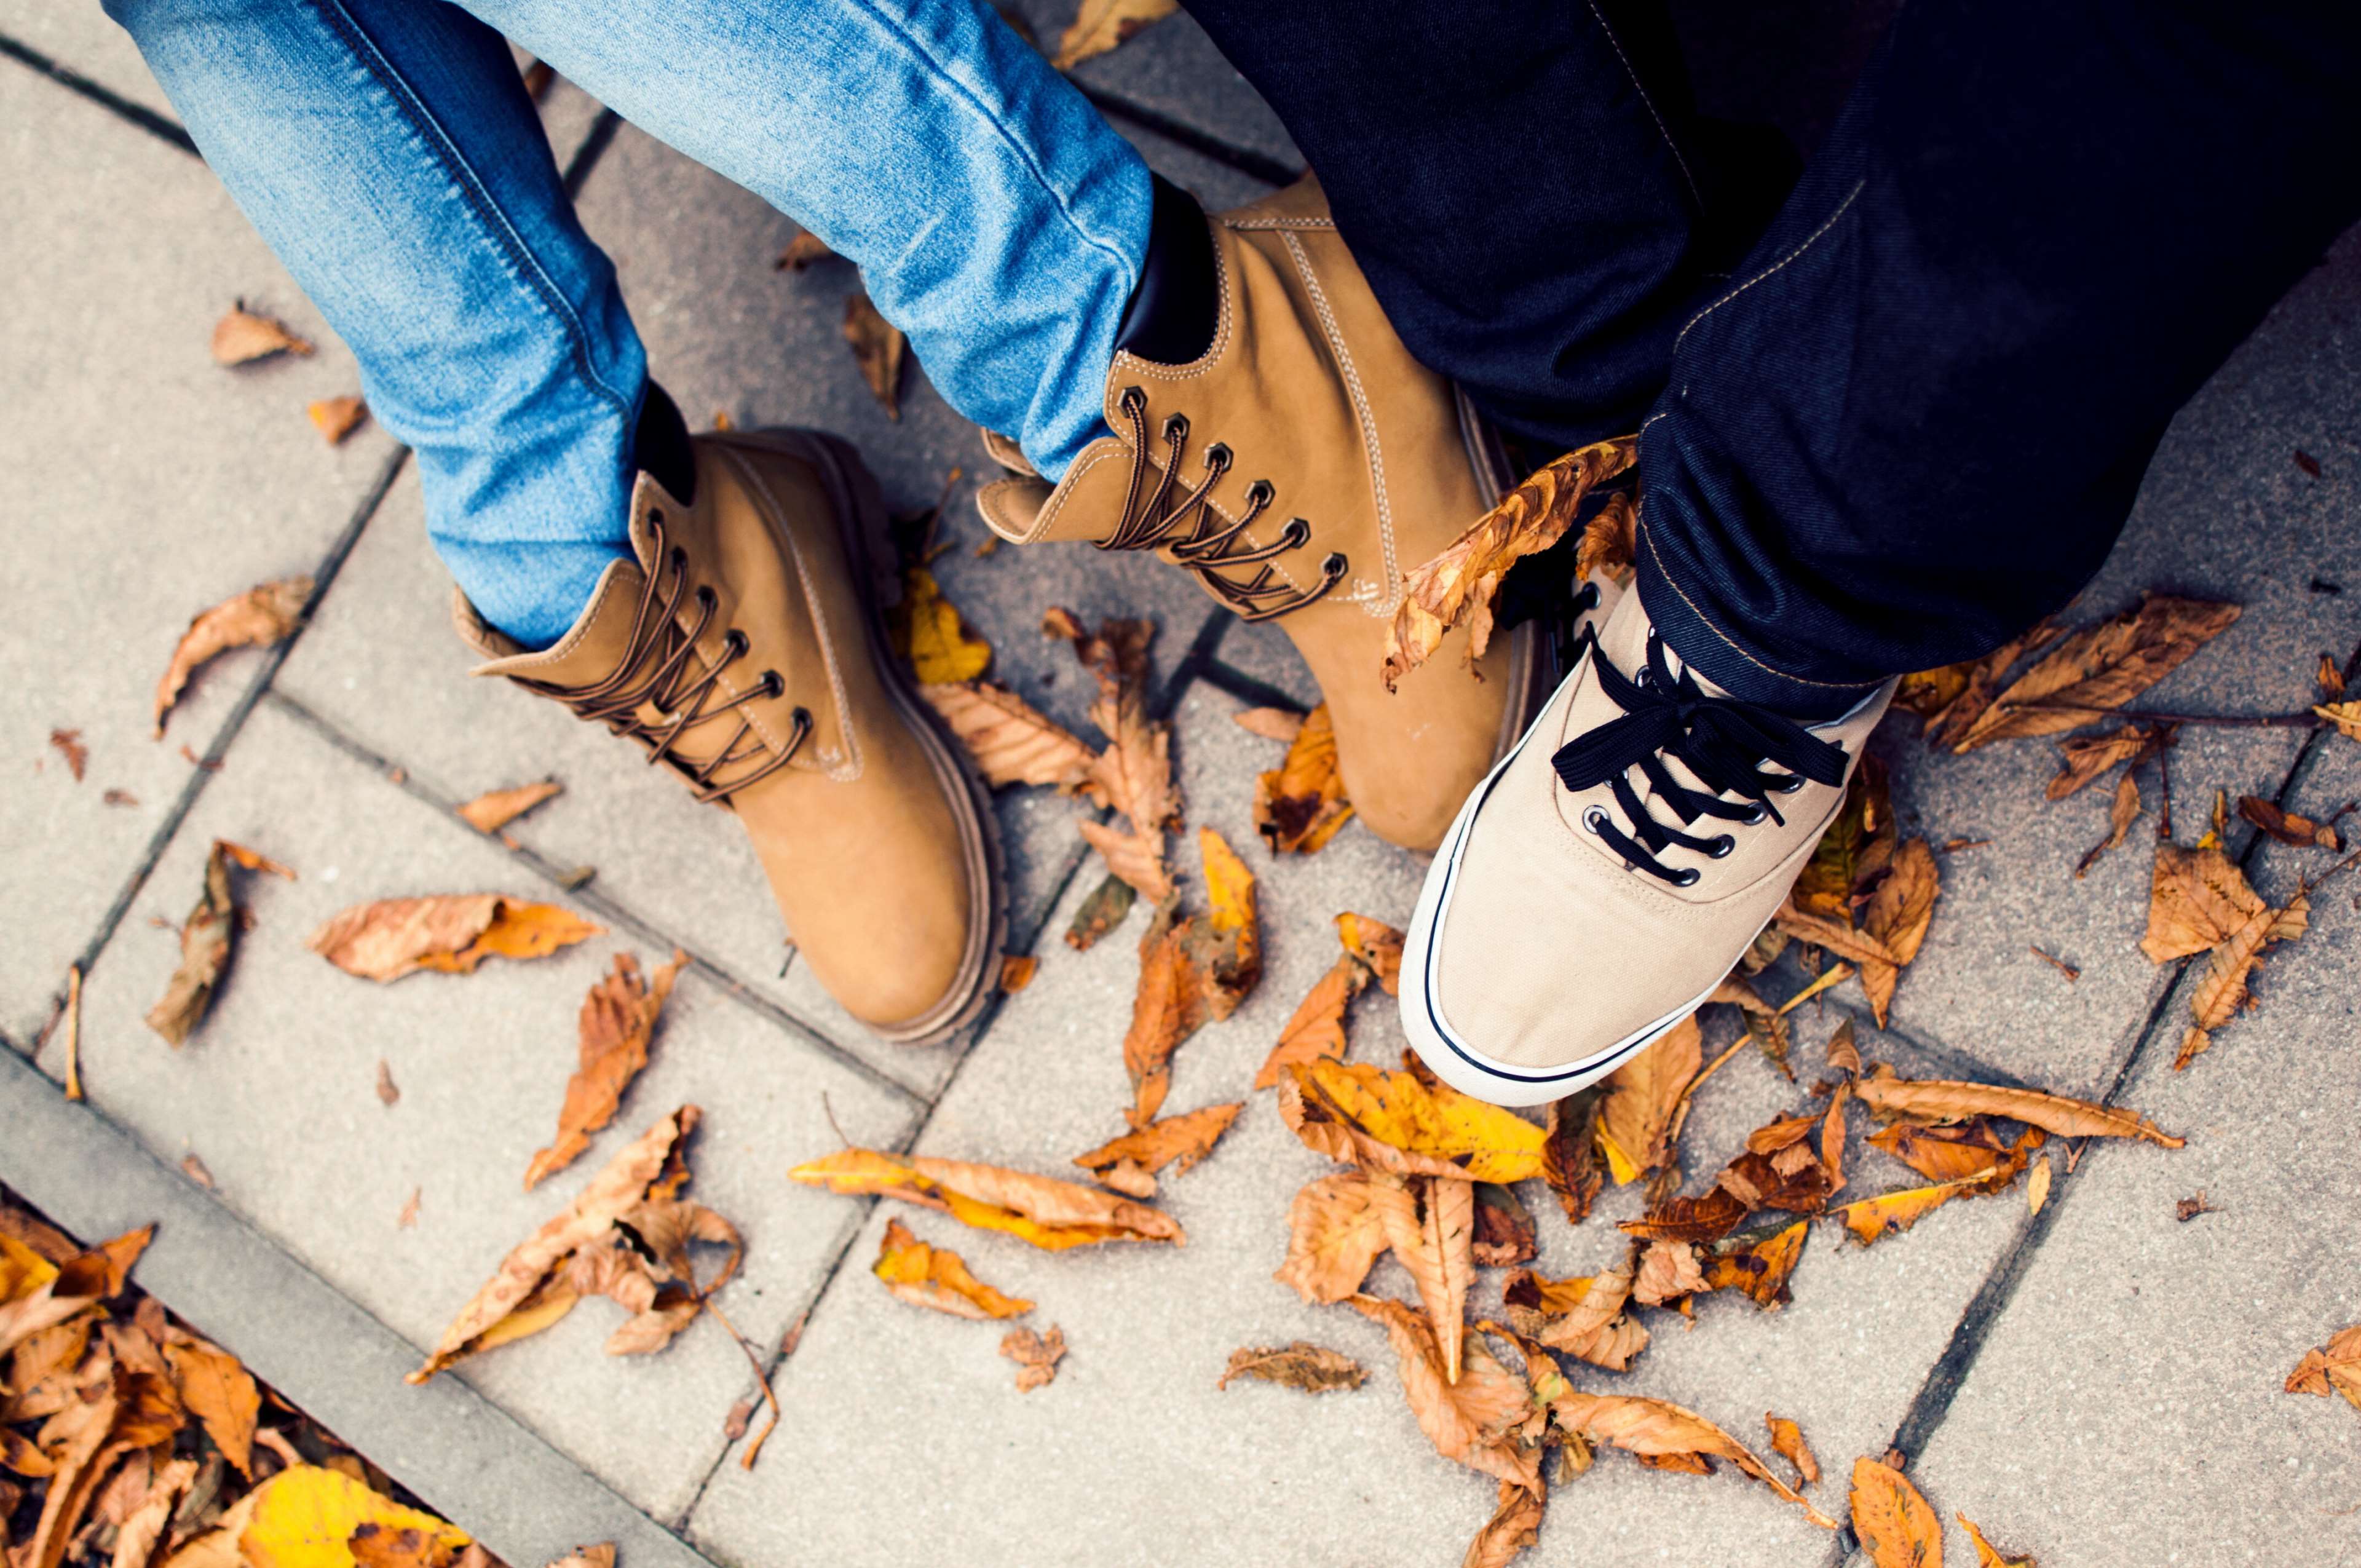 autumn, boots, fall, jeans, leaves, legs, man, shoes, snickers, woman 4k wallpaper. Mocah HD Wallpaper